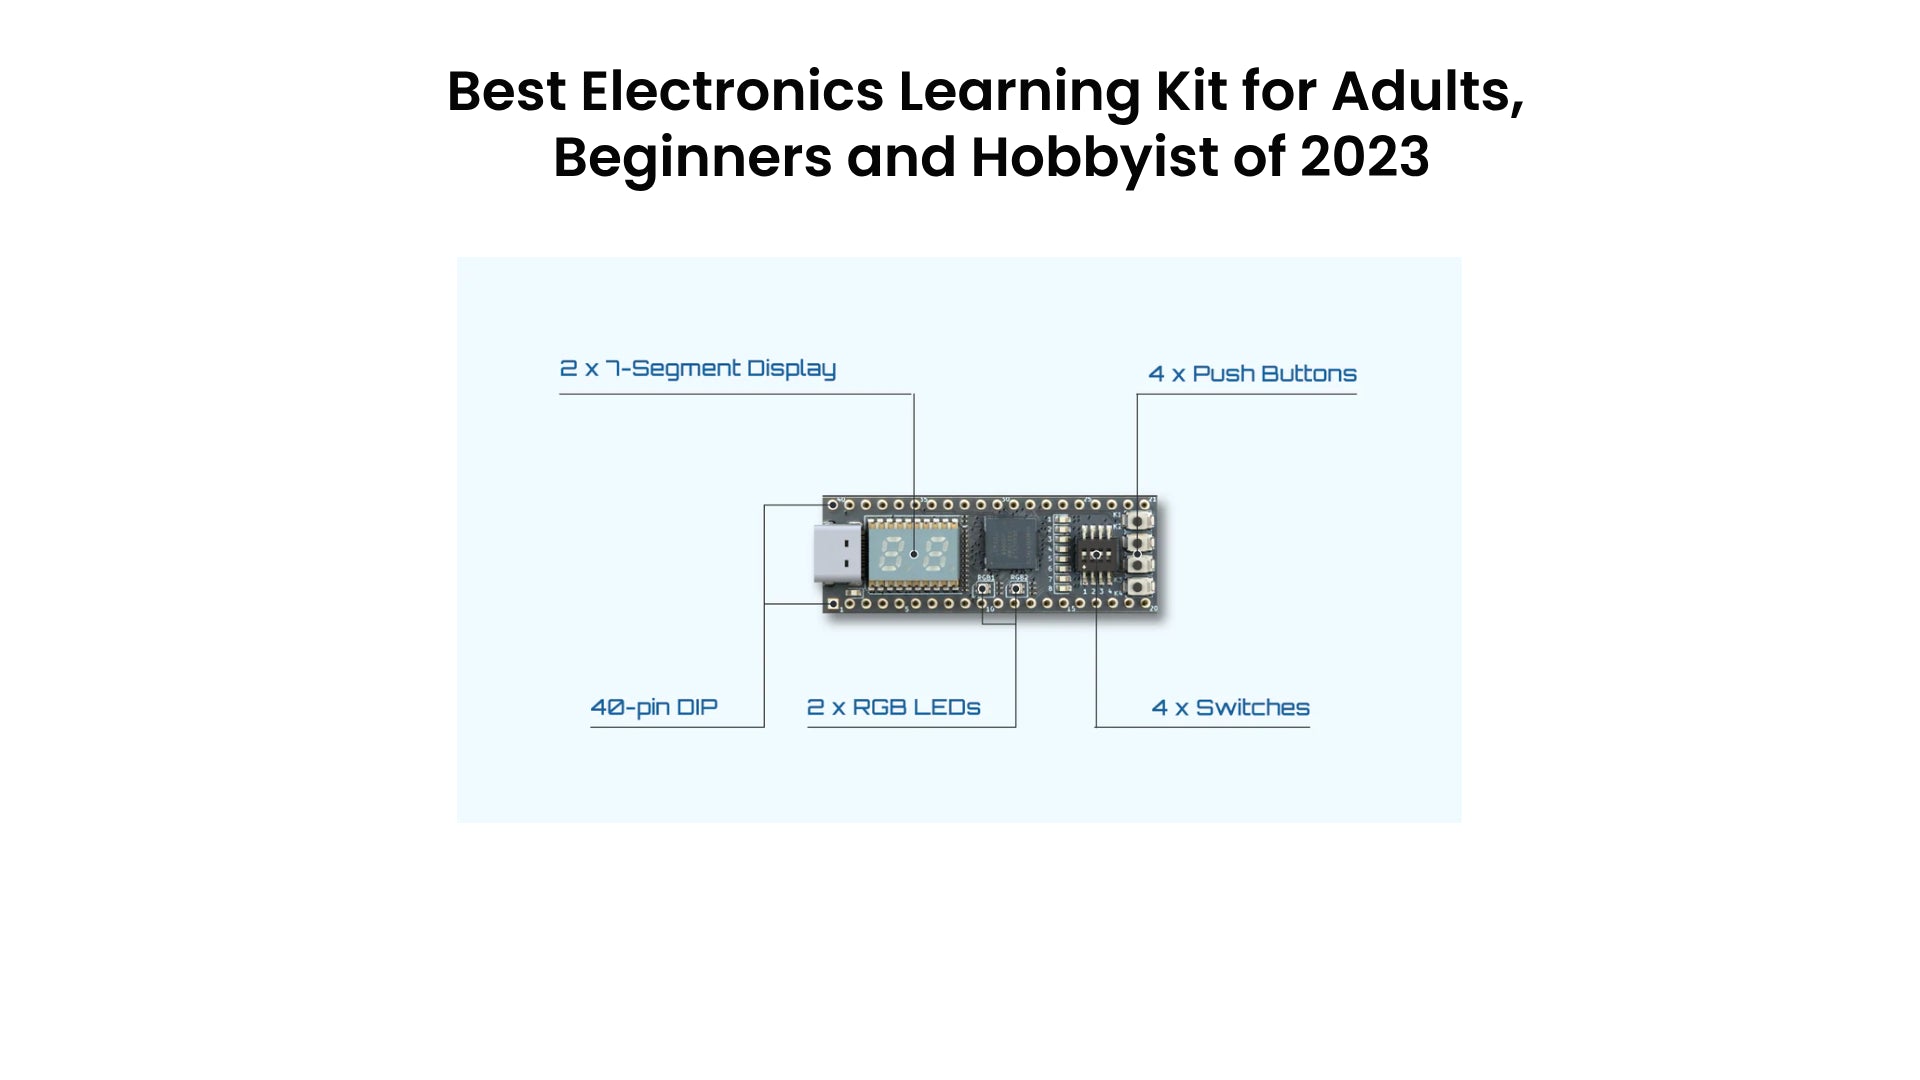 Best Electronics Learning Kit for Adults, Beginners and Hobbyist of 2023